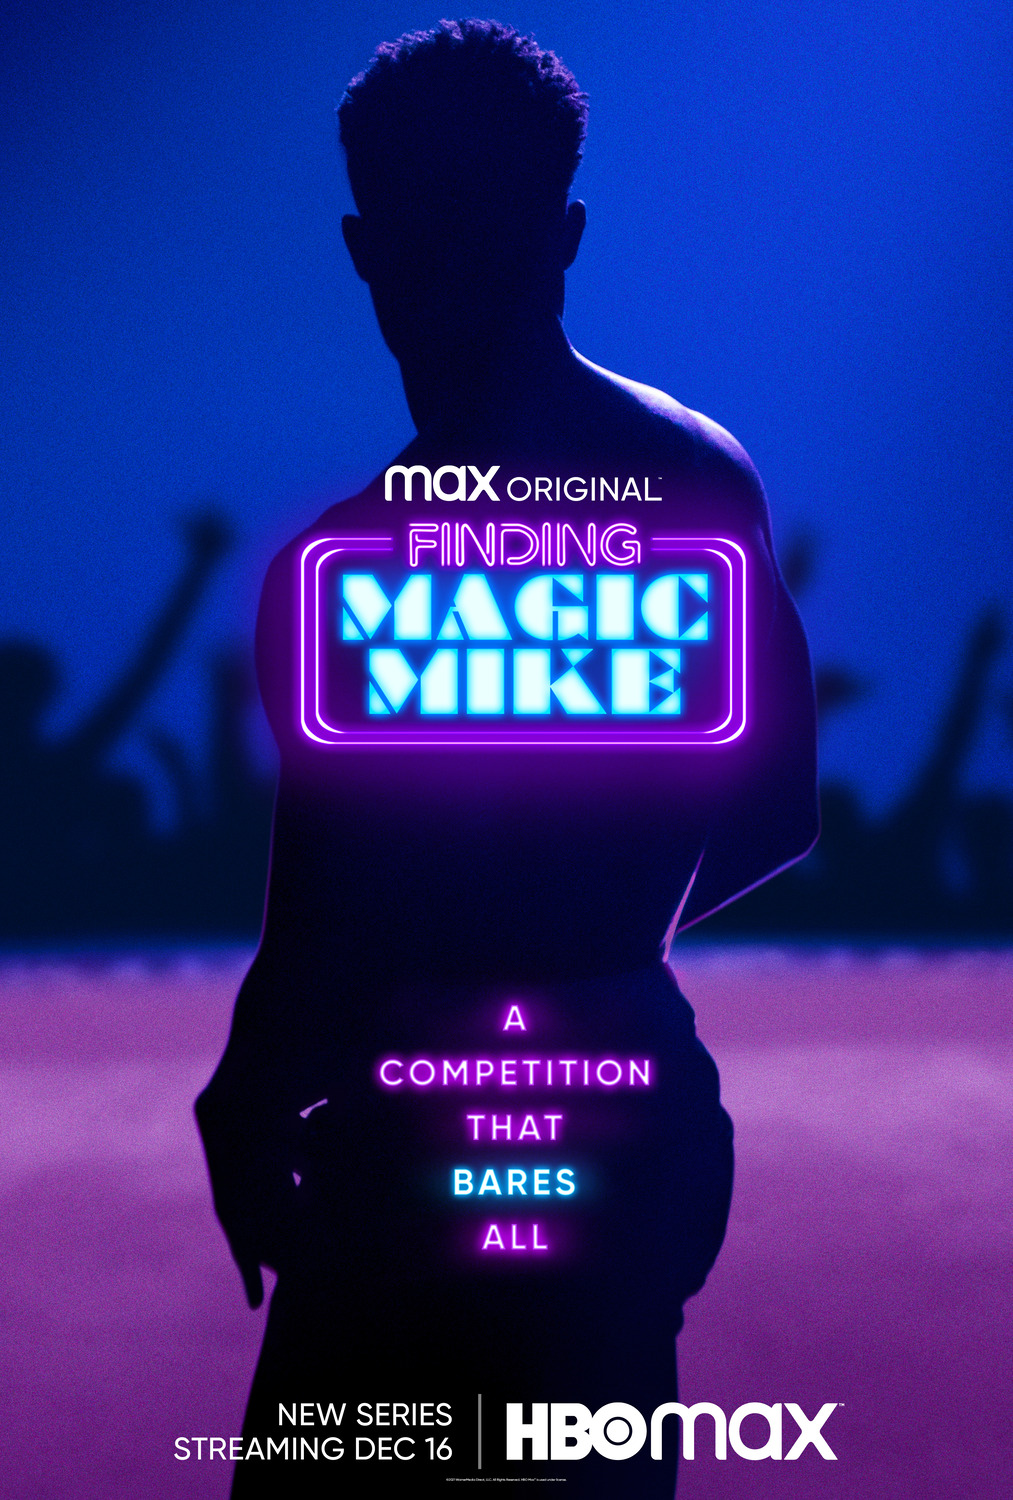 Extra Large TV Poster Image for Finding Magic Mike 